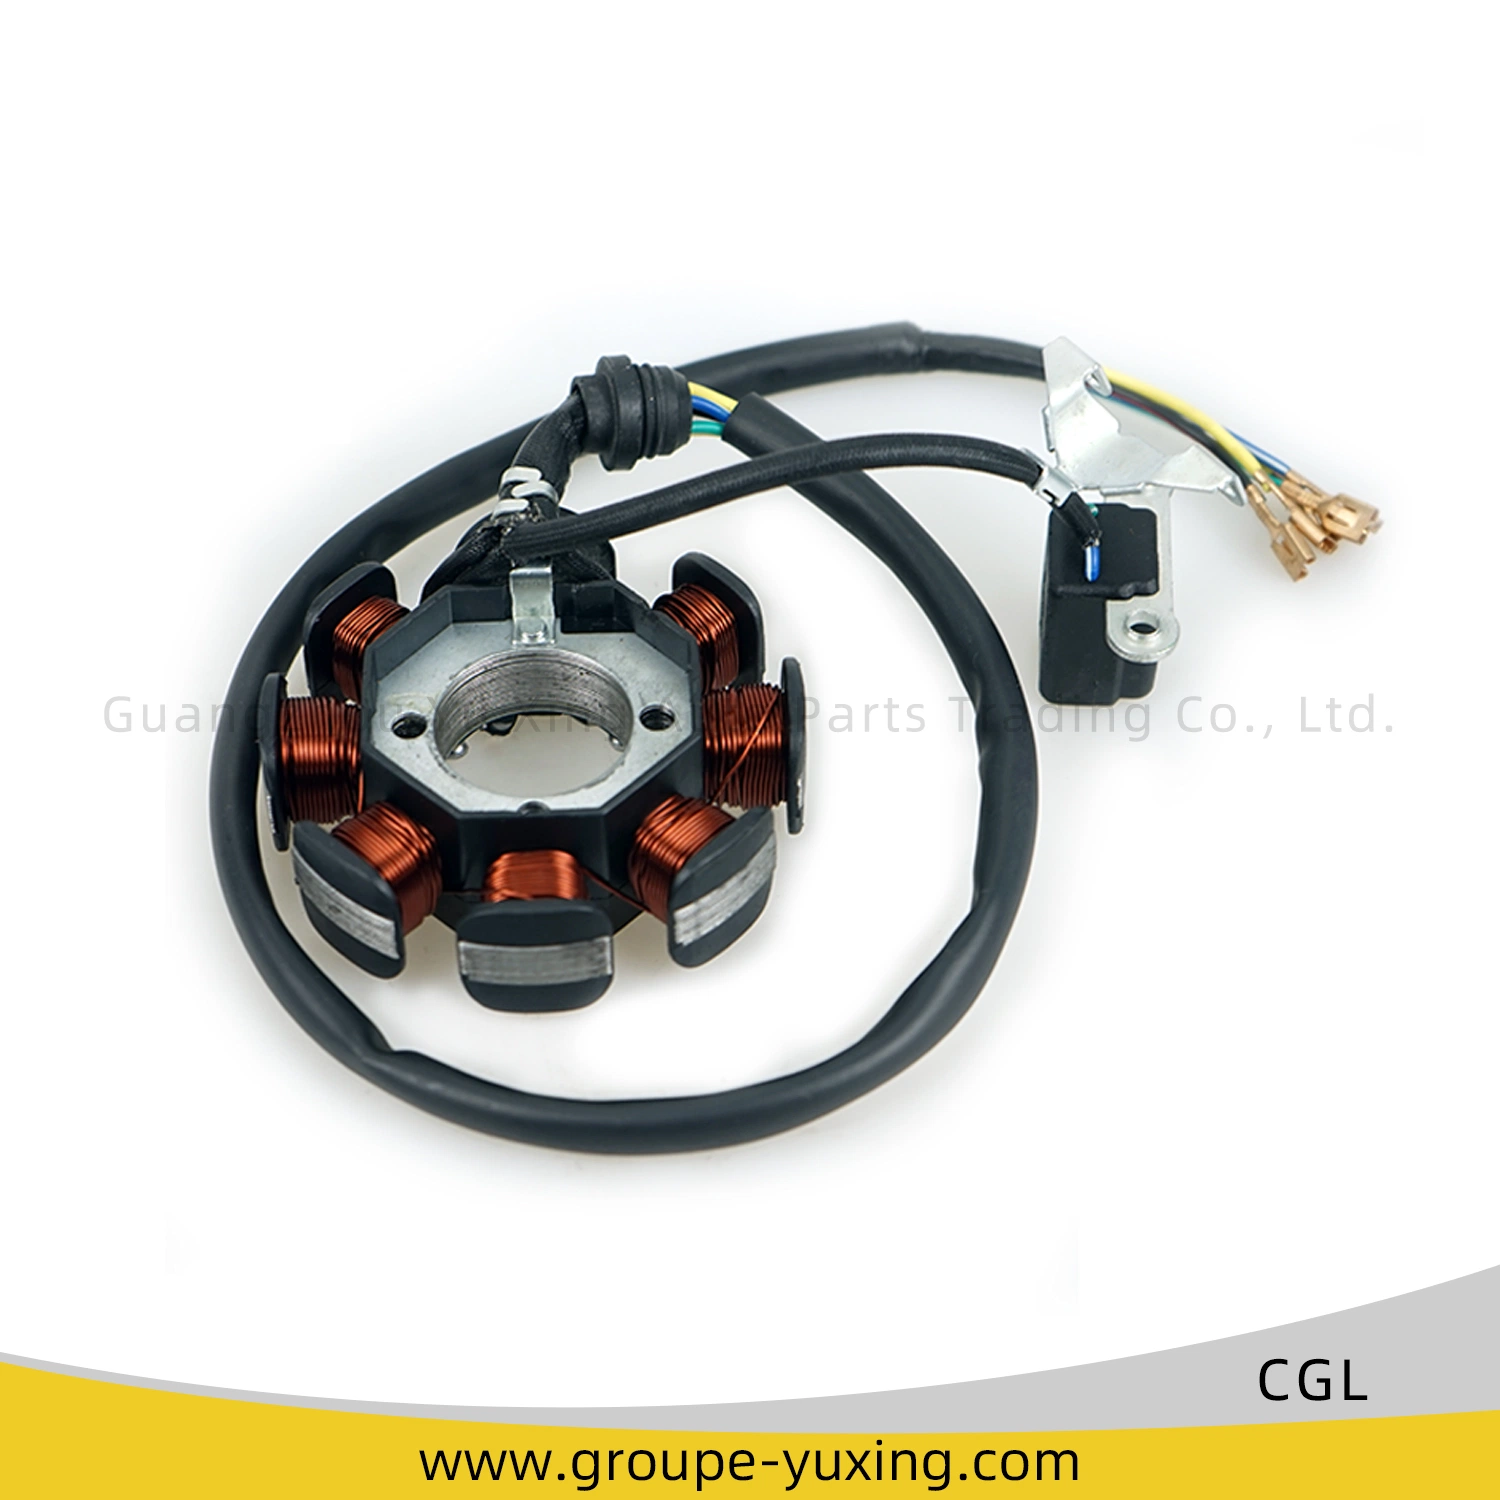 China Good Quality Motorcycle Magnetor Stator Coil of Motorcycle Spare Parts